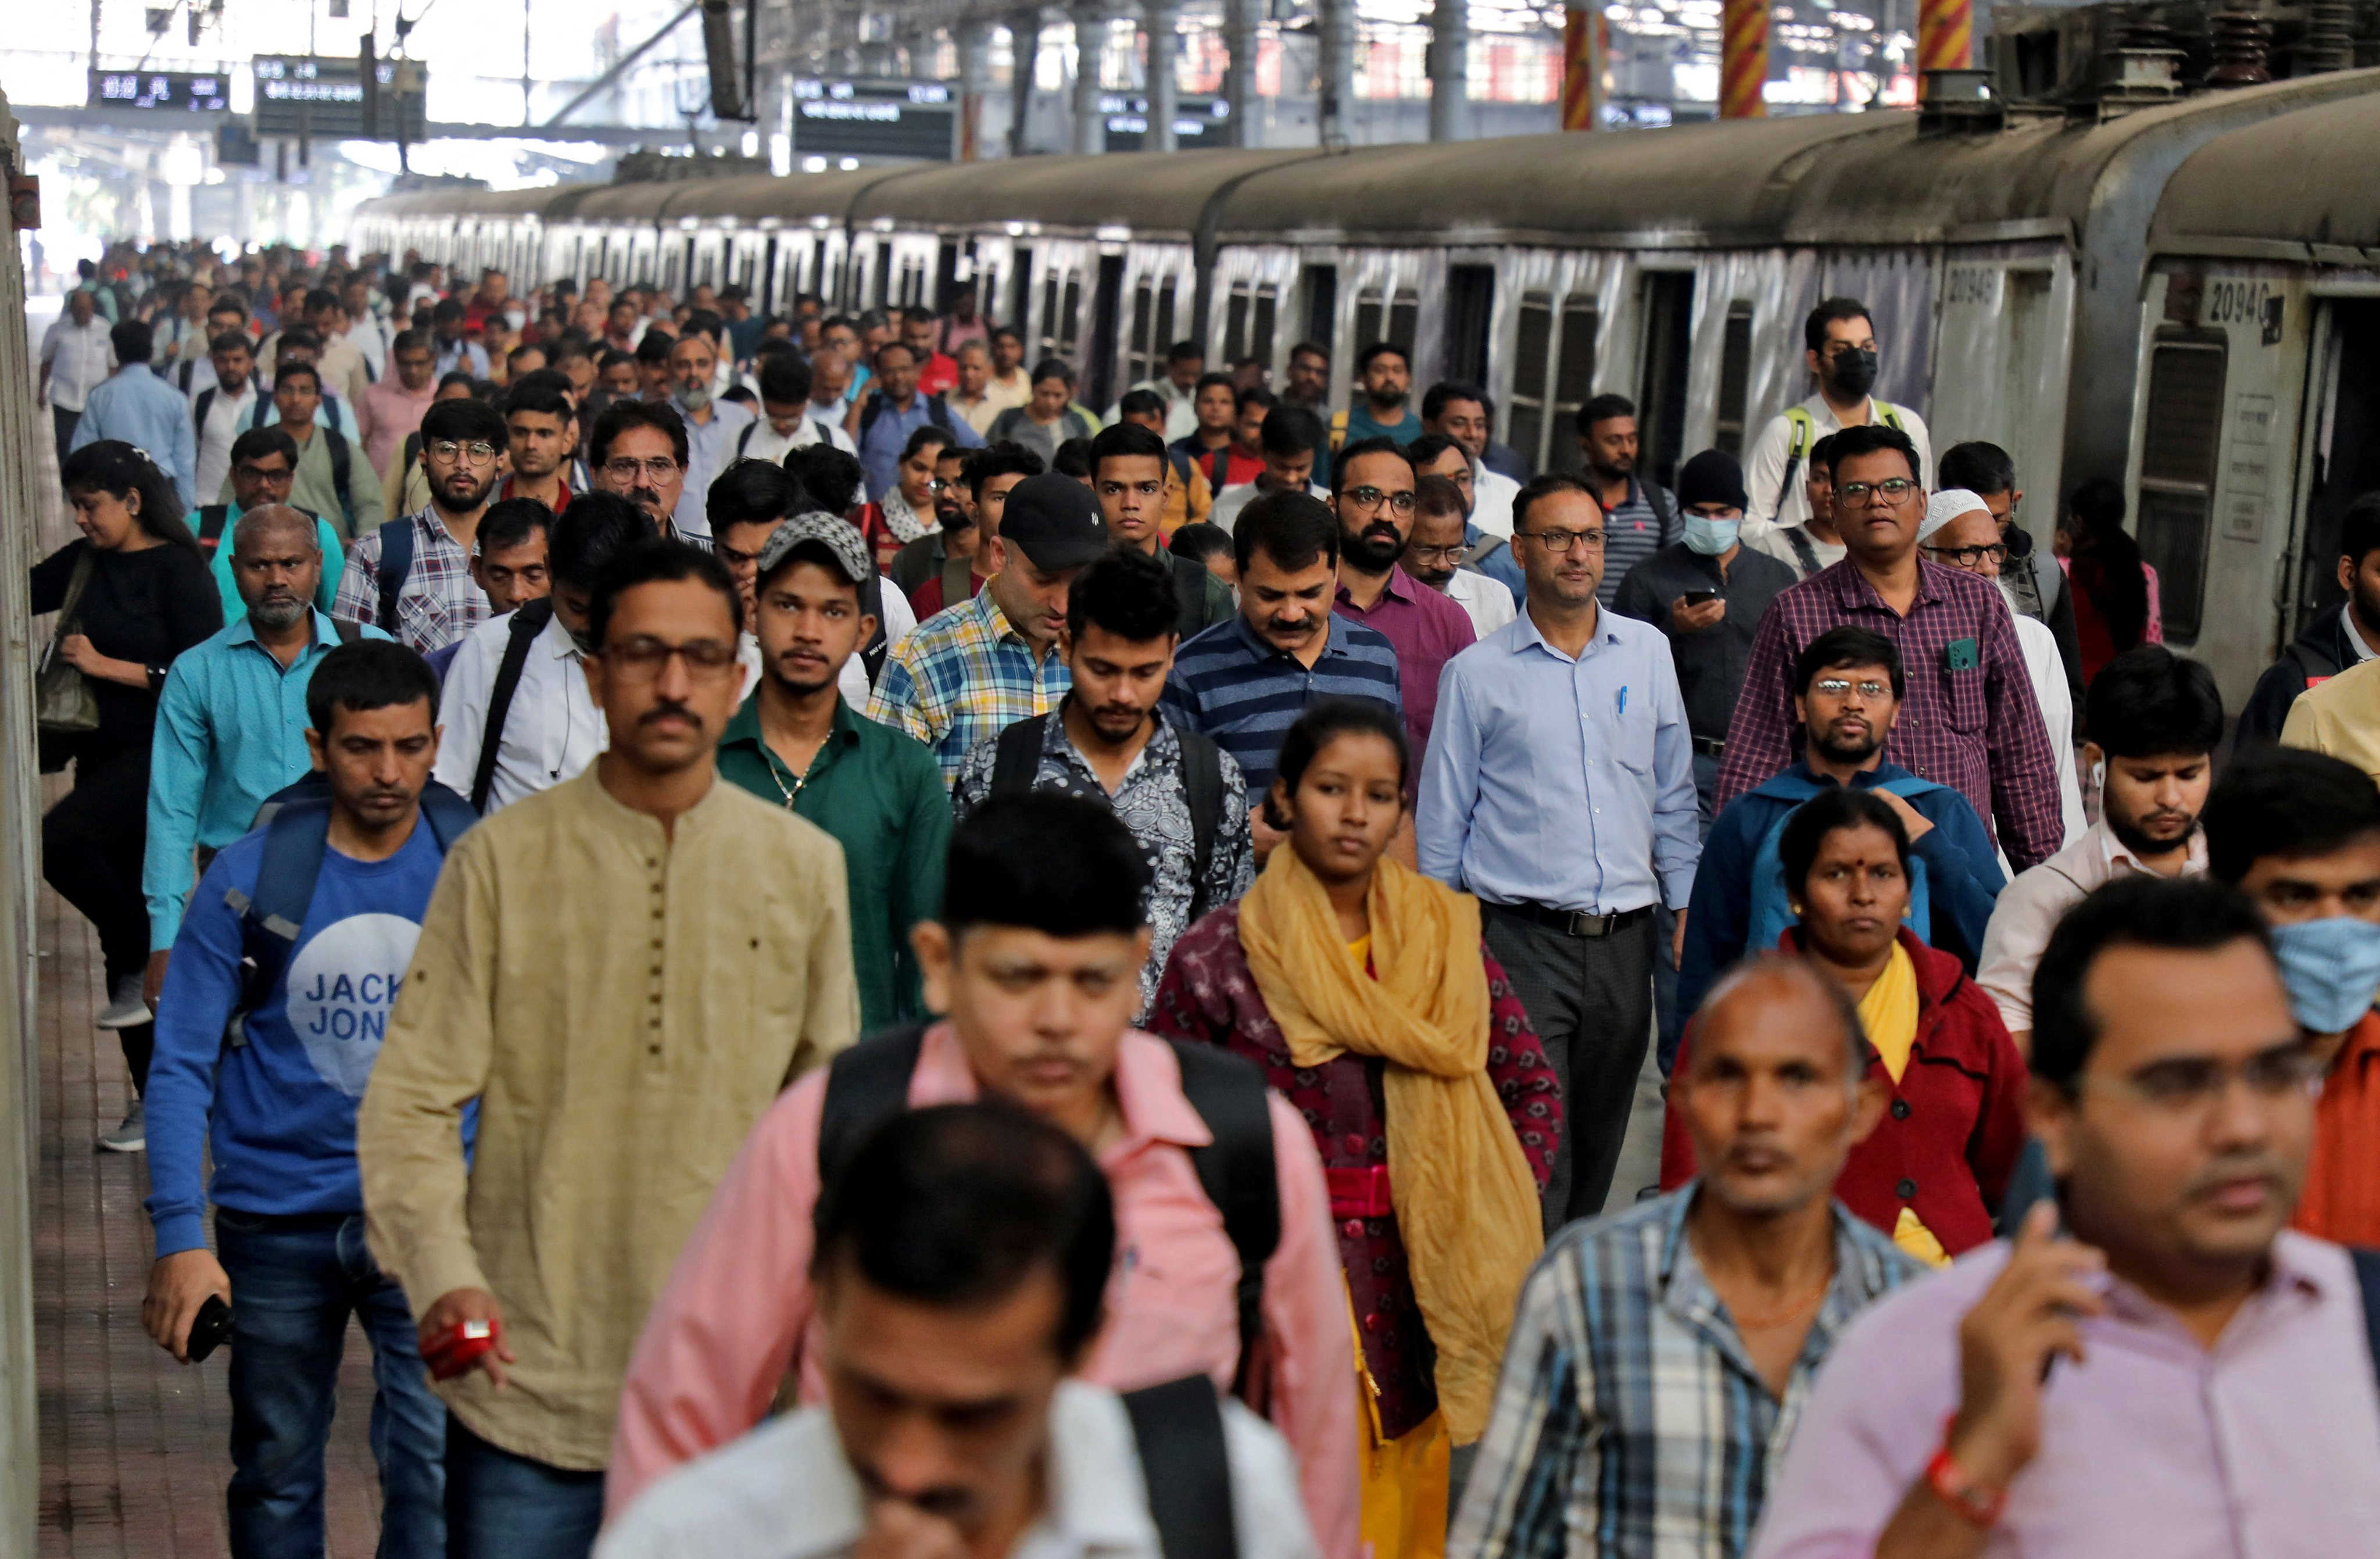 Commuters walk on a platform after disembarking from a train in Mumbai, India. The nation’s last census was due in 2021. It is still unclear when it might happen. Photo: Reuters 